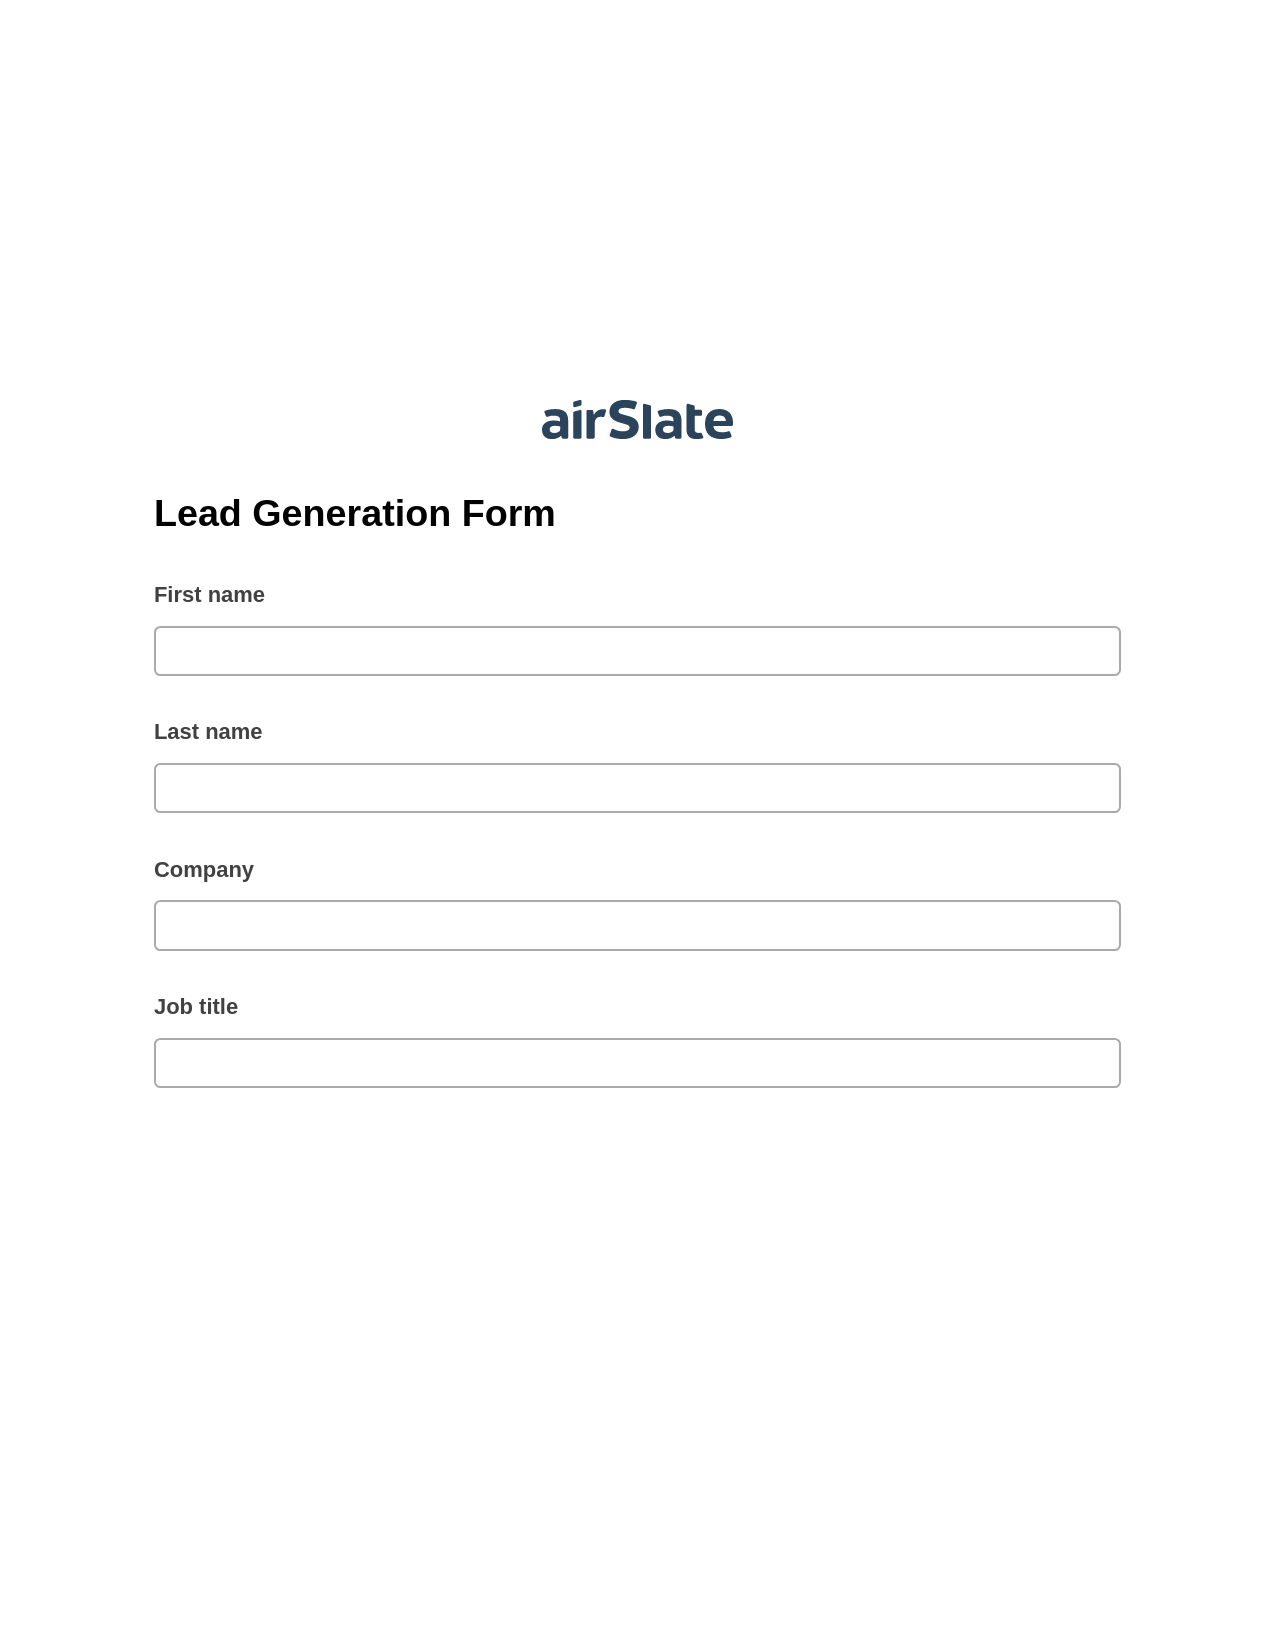 Lead Generation Form Pre-fill Dropdowns from Airtable, Remove Tags From Slate Bot, Post-finish Document Bot